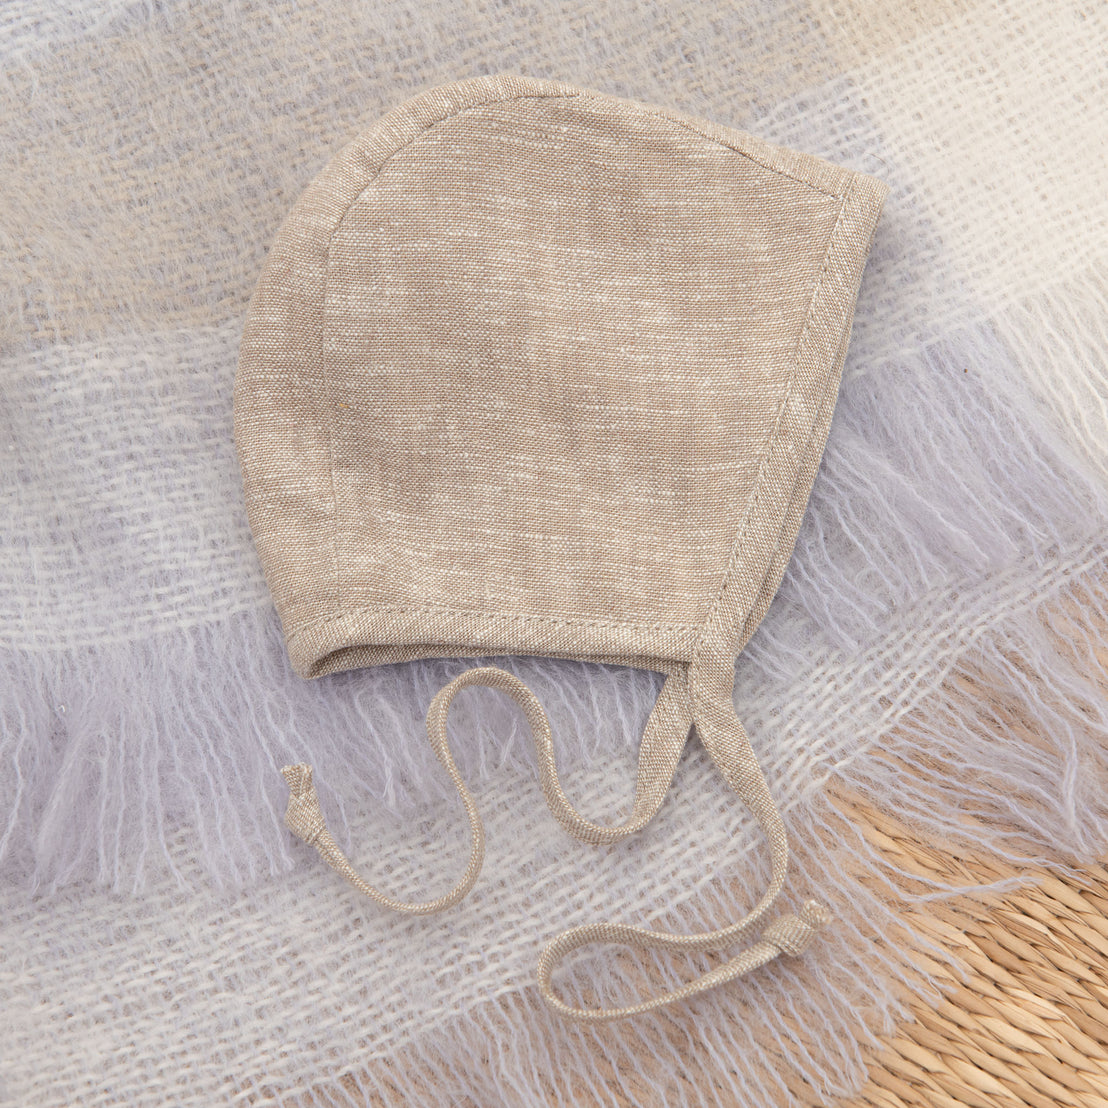 An upscale Austin Linen Bonnet with ties, placed on a soft, lilac textile background, perfect for a coming home outfit.